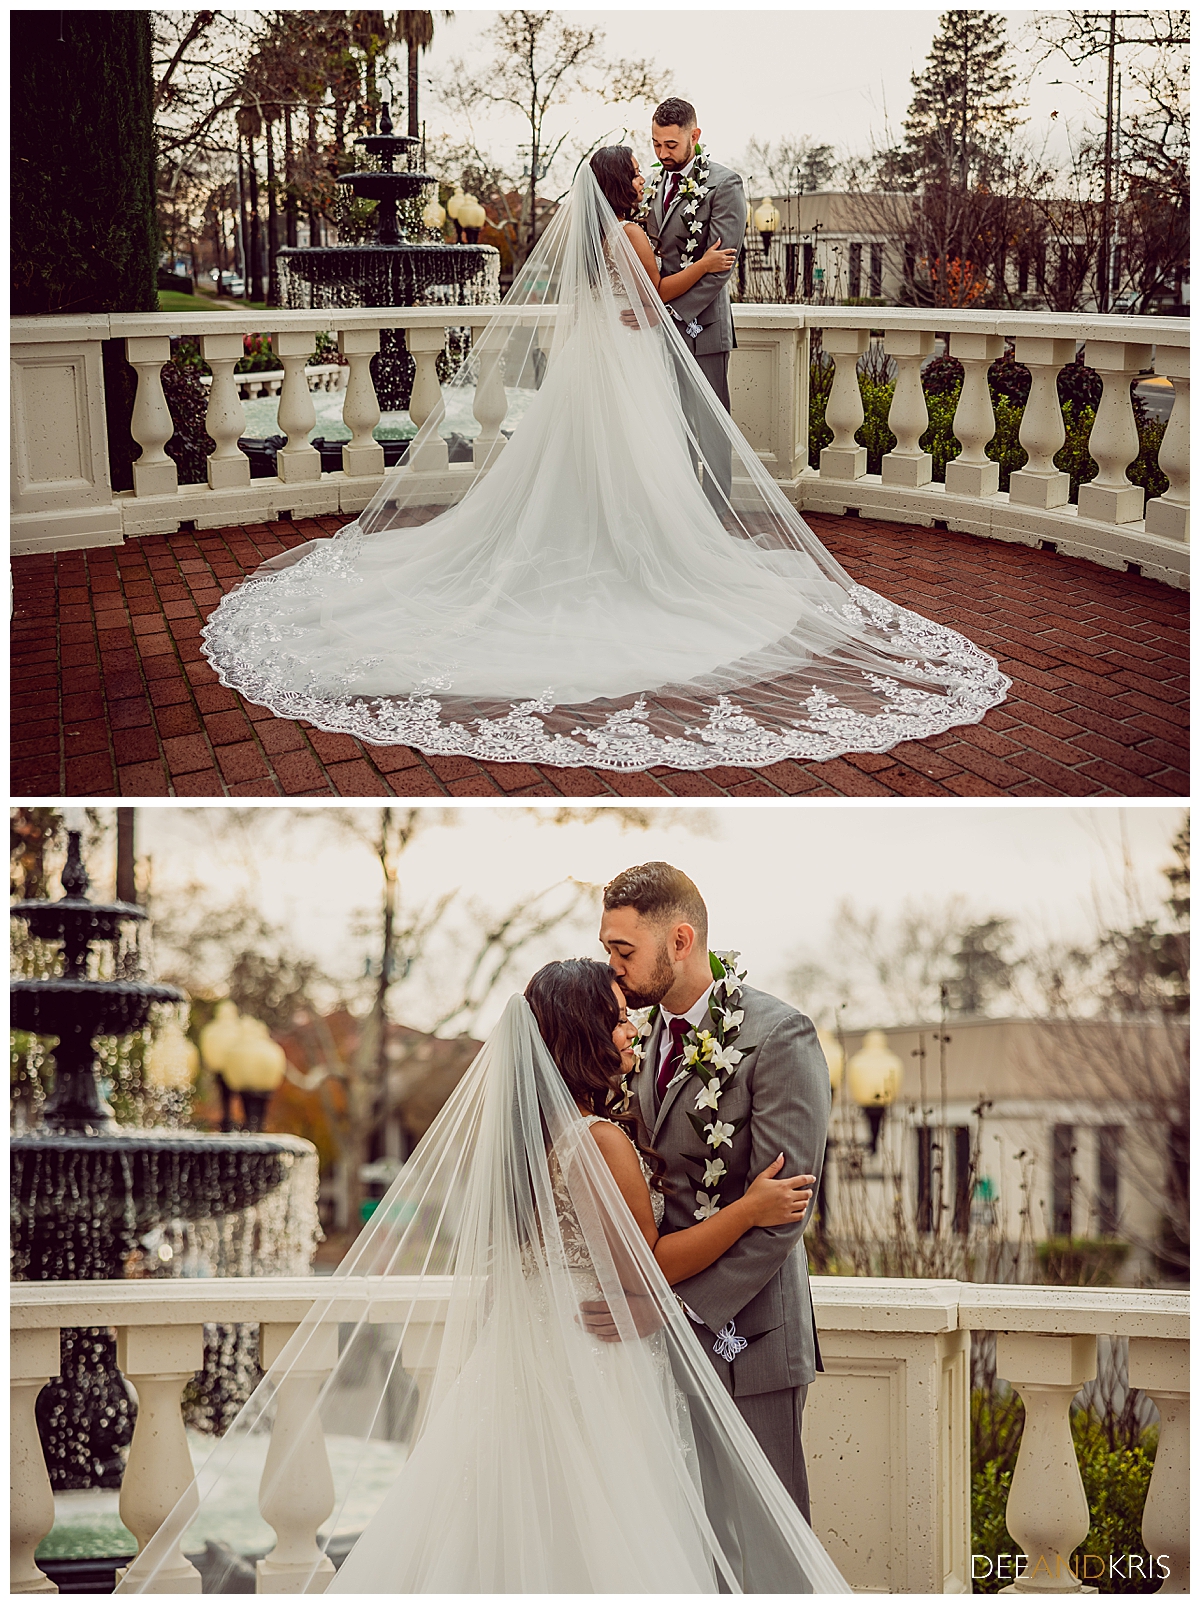 Two images: Top images of bride and groom standing on balcony with veil and train spread out in a circle. Bottom close-up image of groom kissing bride's forehead.